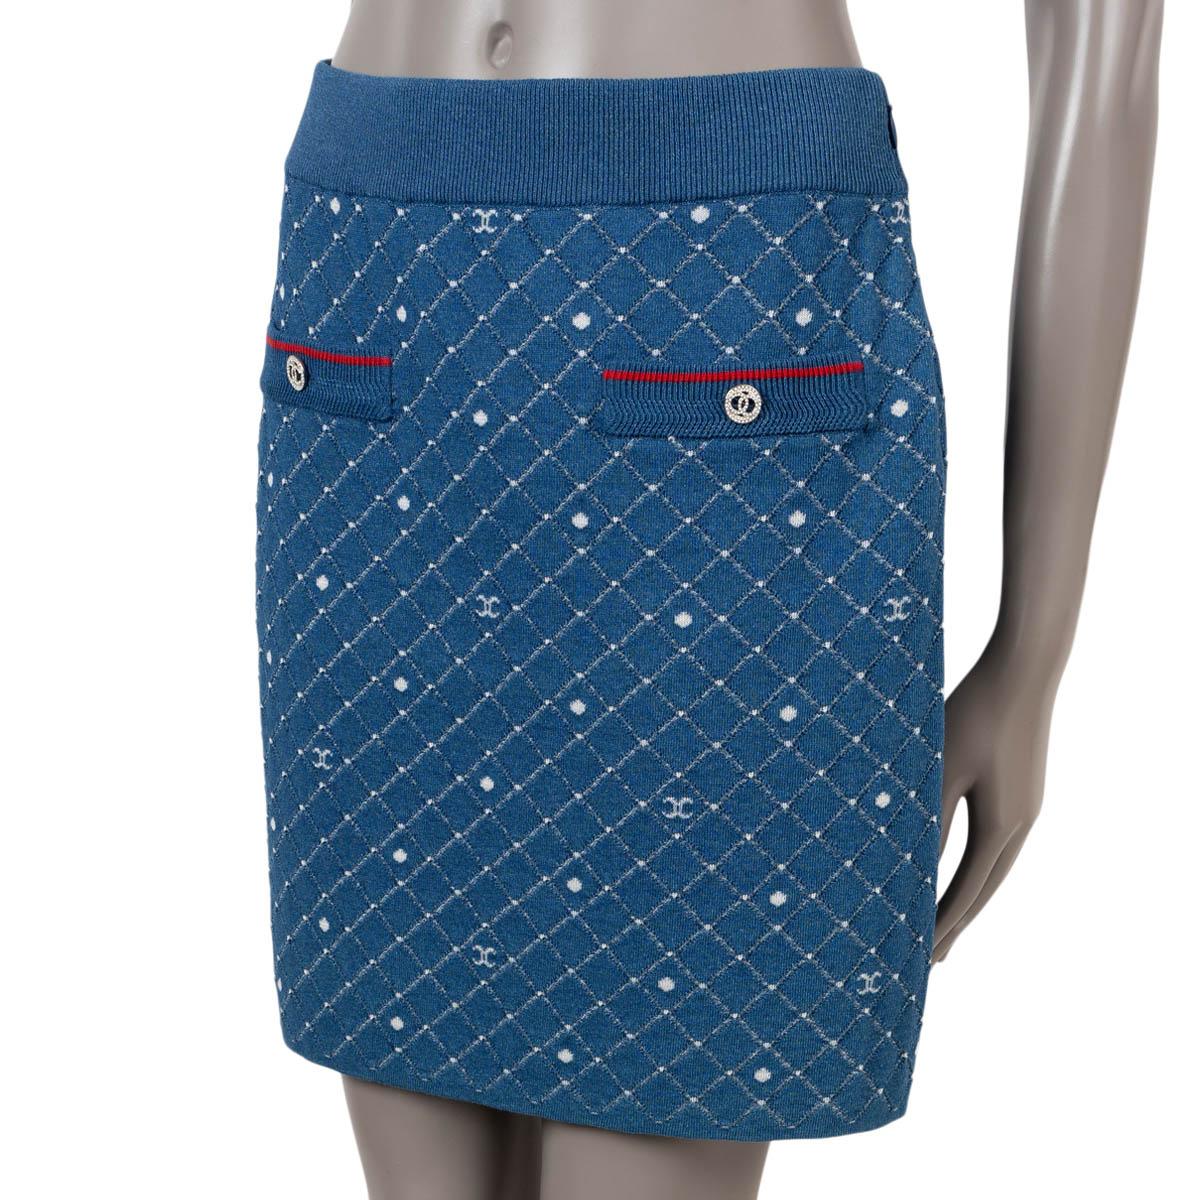 100% authentic Chanel mini skirt in blue, white and red jersey cotton (74%), polyamide (20%) and elastane (6%). Features two buttoned slit pockets on the front. Opens with a concealed zipper and hook at the side. Unlined. Has been worn and is in